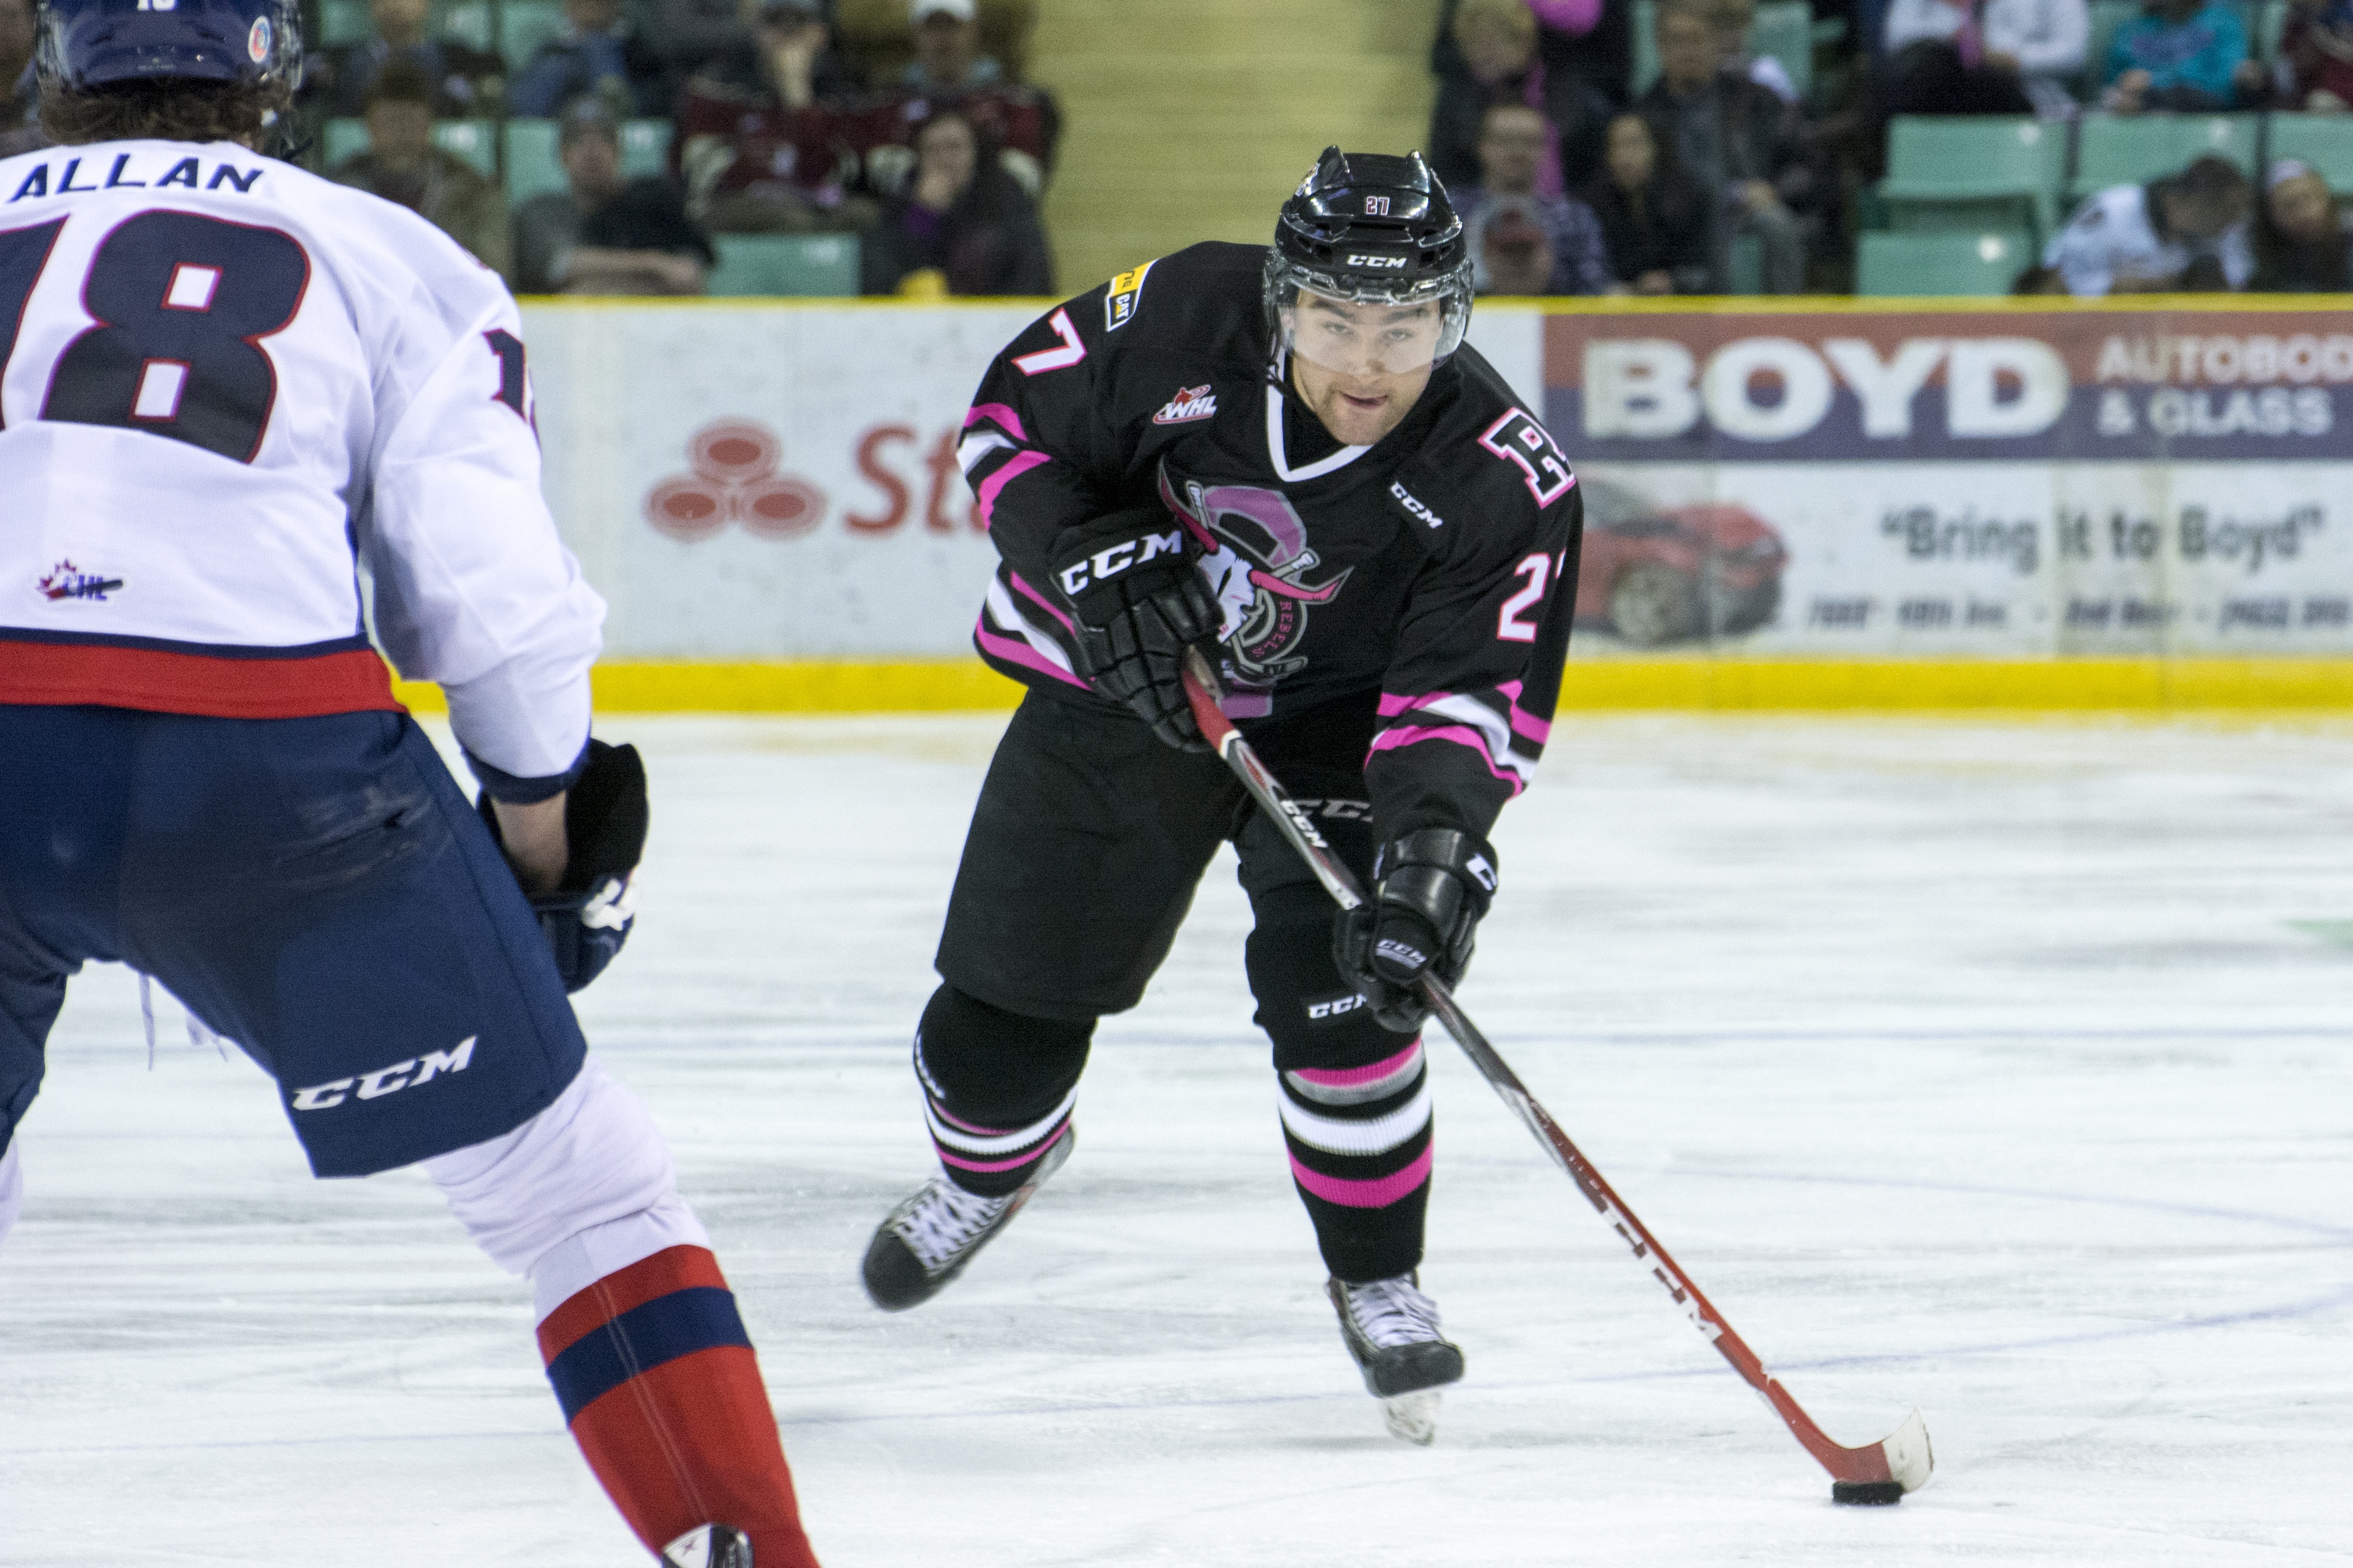 BIG DRIVE – Rebels defenseman Brett Cote makes a shot on goal during a game against the Lethbridge Hurricanes this past Saturday night at the Enmax Centrium. The Rebels dawned pink and black jerseys for the evening in support of breast cancer awareness.